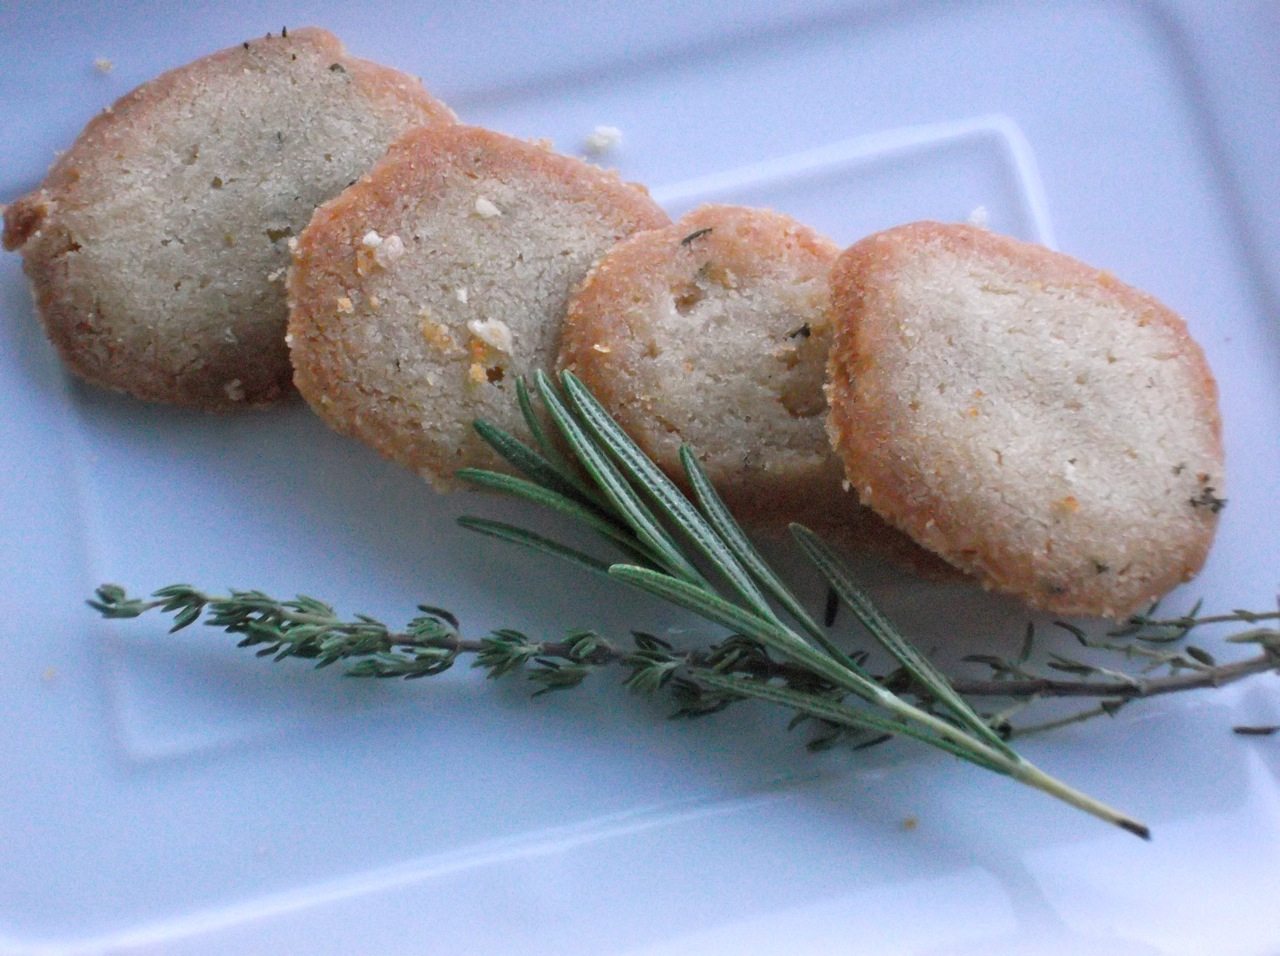 Rosemary and Thyme Biscuits